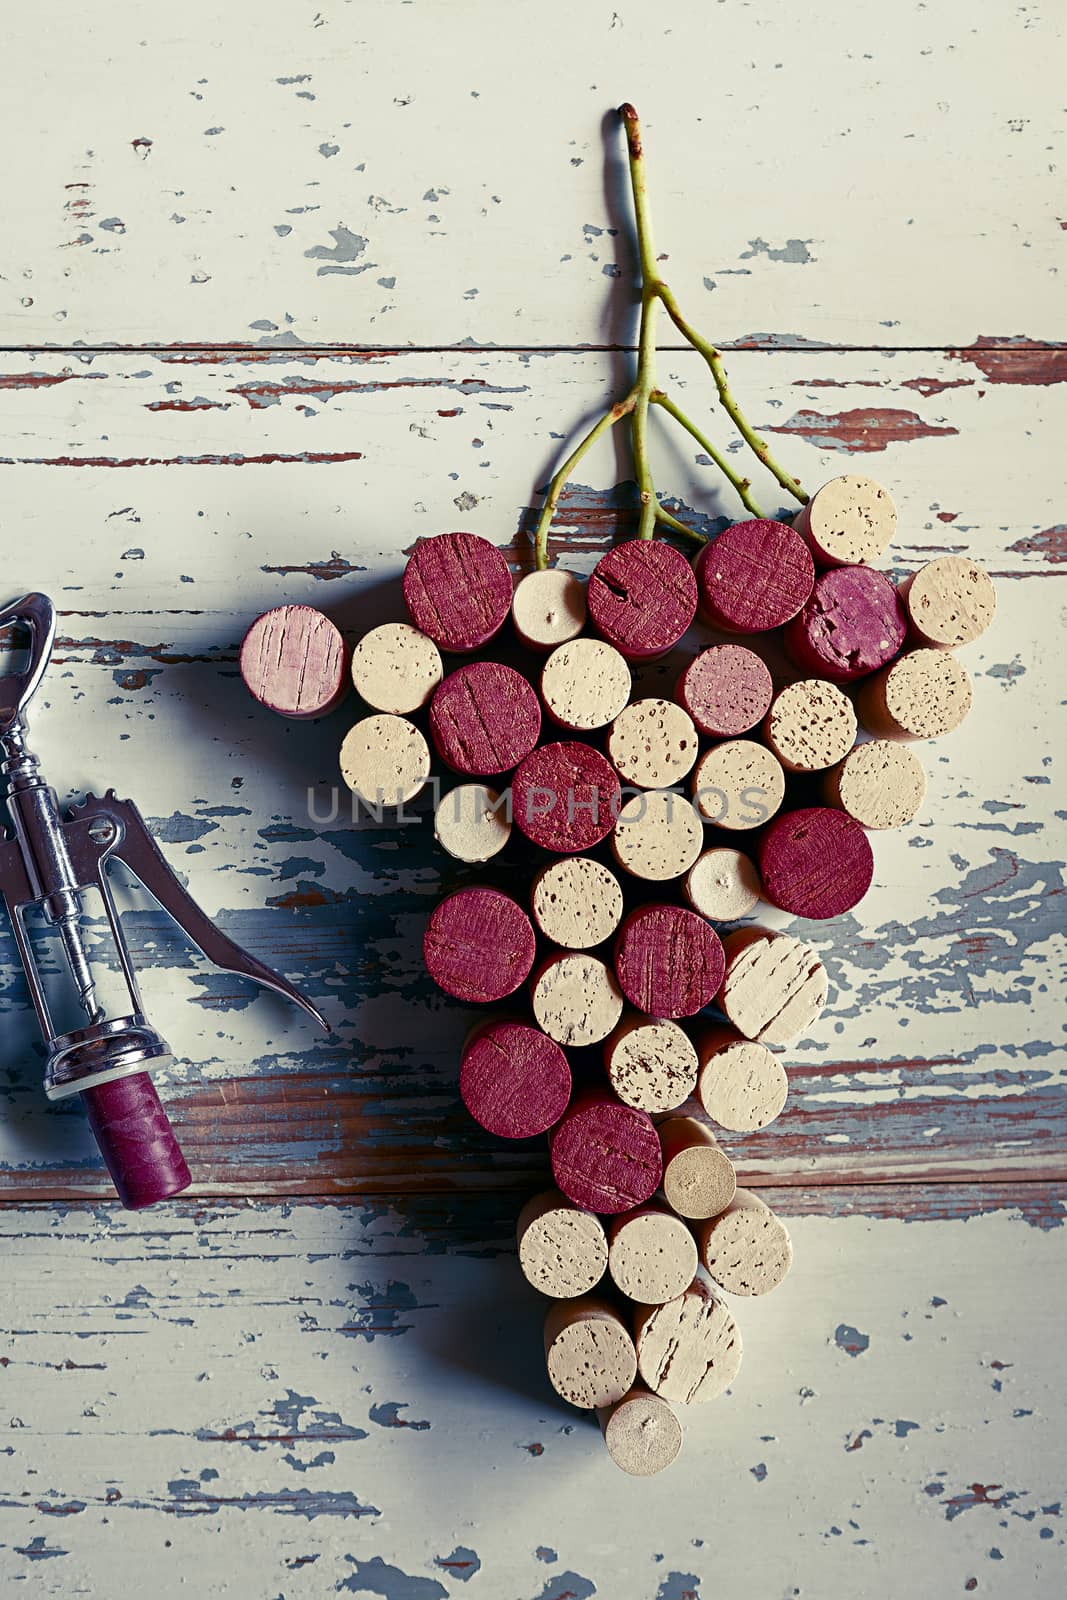 Corks grapes on wood background